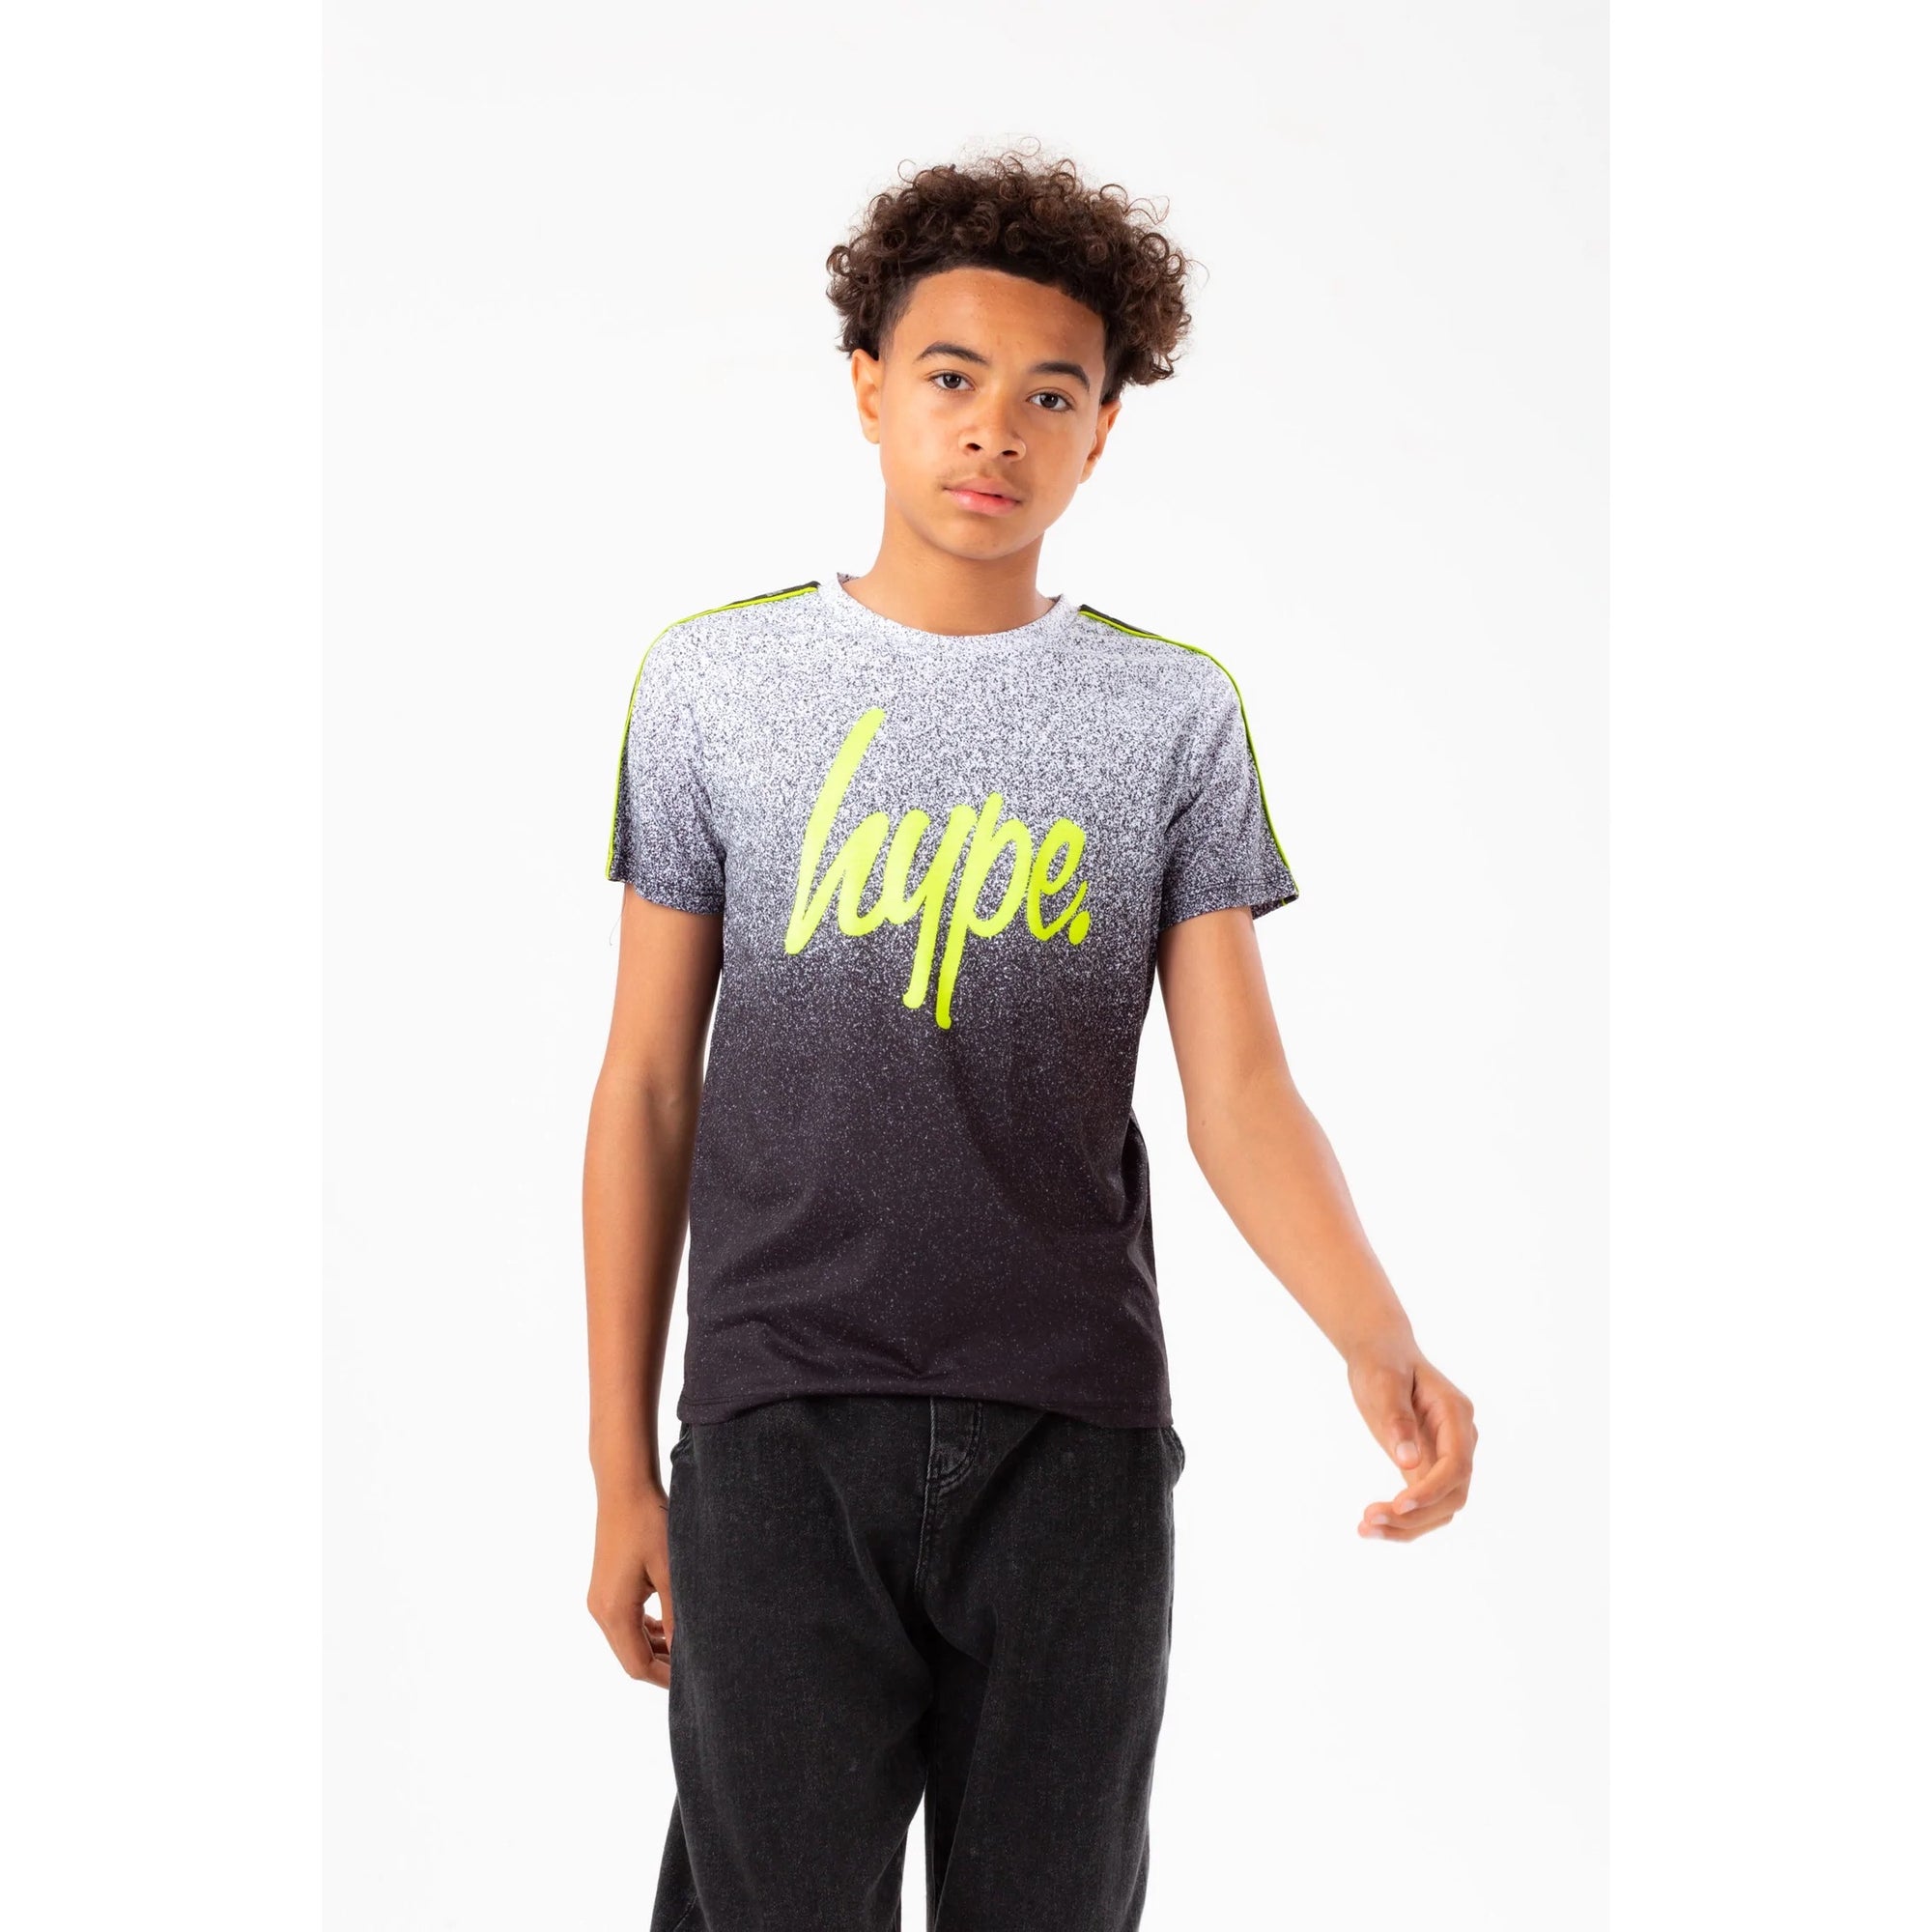 Hype Mono Speckle Fade Tape T-Shirt Yvlr330 Clothing 9/10YRS / Black,11/12YRS / Black,13YRS / Black,14YRS / Black,15YRS / Black